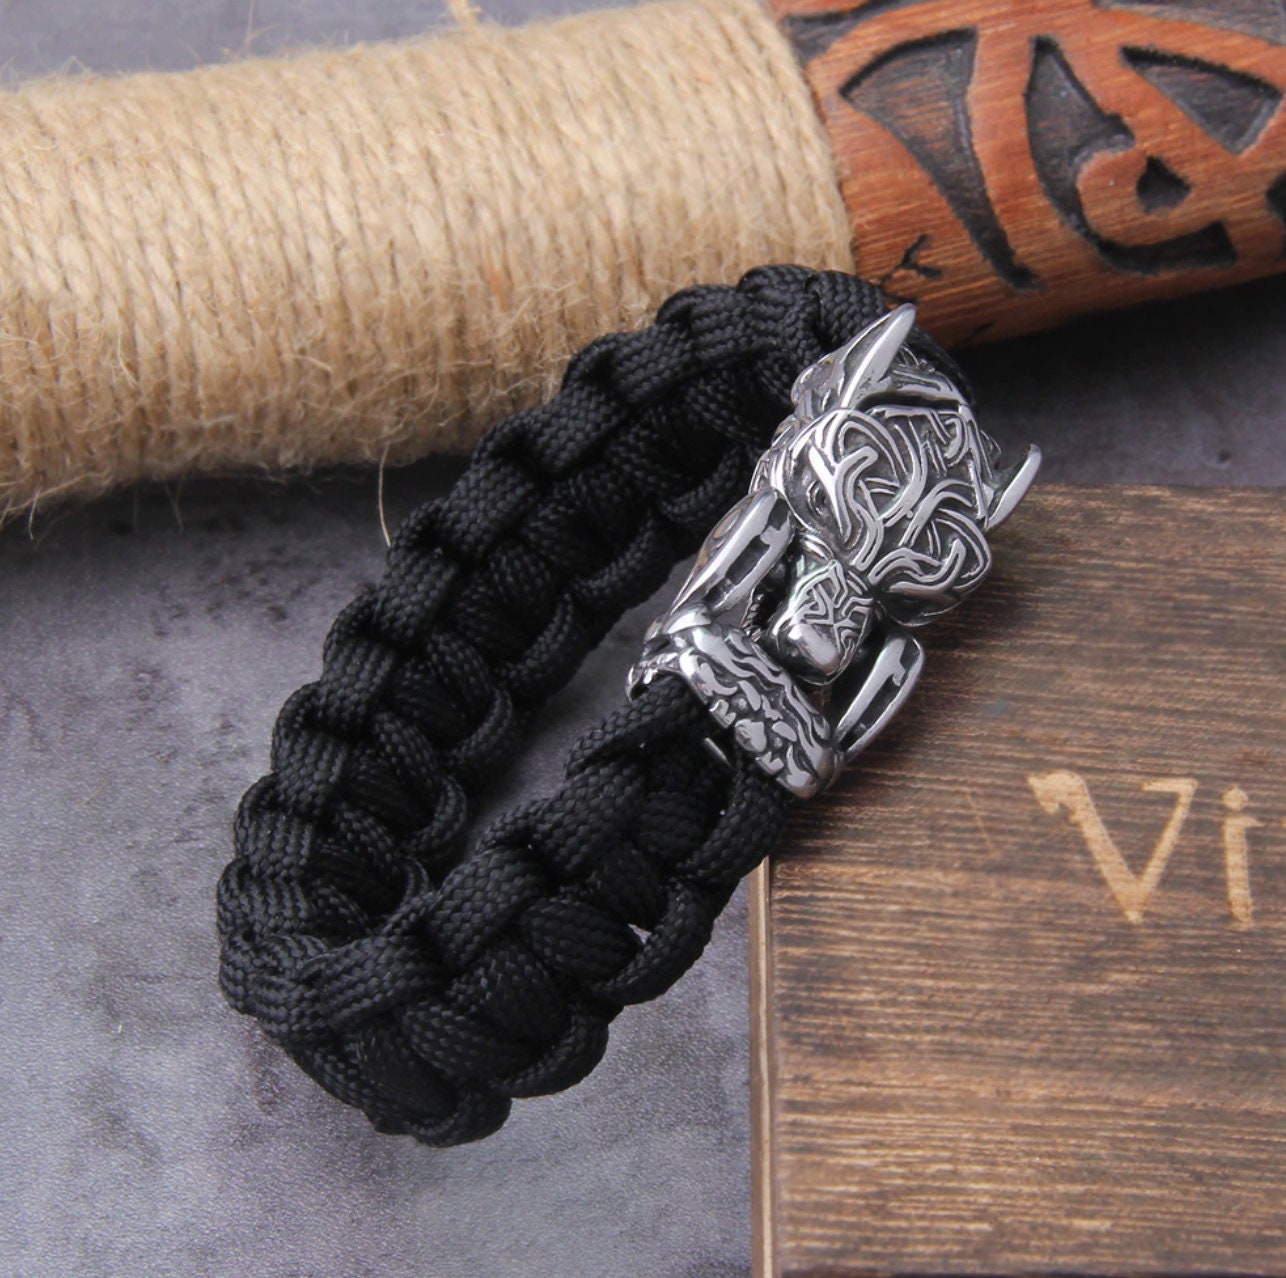 New Jewelry Six-piece Leather Wax Rope Multiple Hand-woven Men's Leather  Bracelet Punk Adjustablebangles